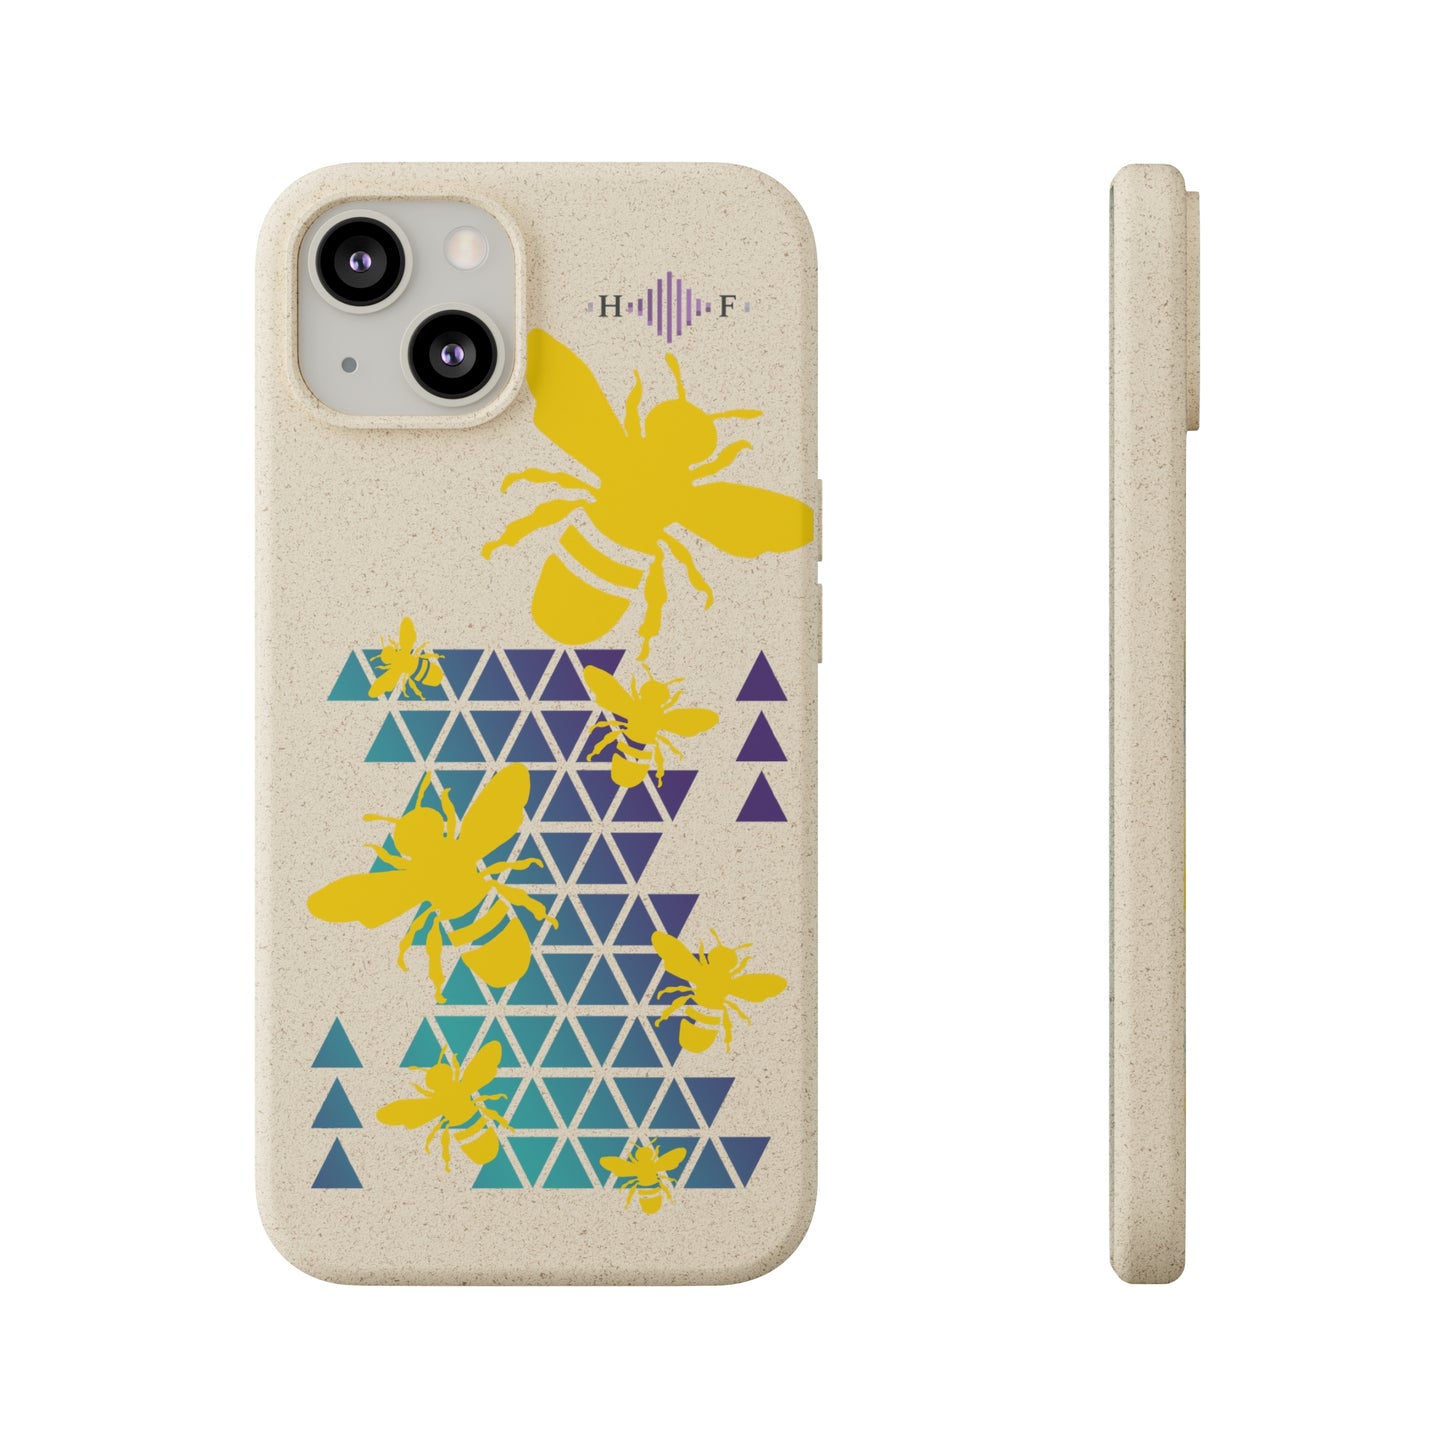 Golden Bees ECO FRIENDLY - Biodegradable Cases